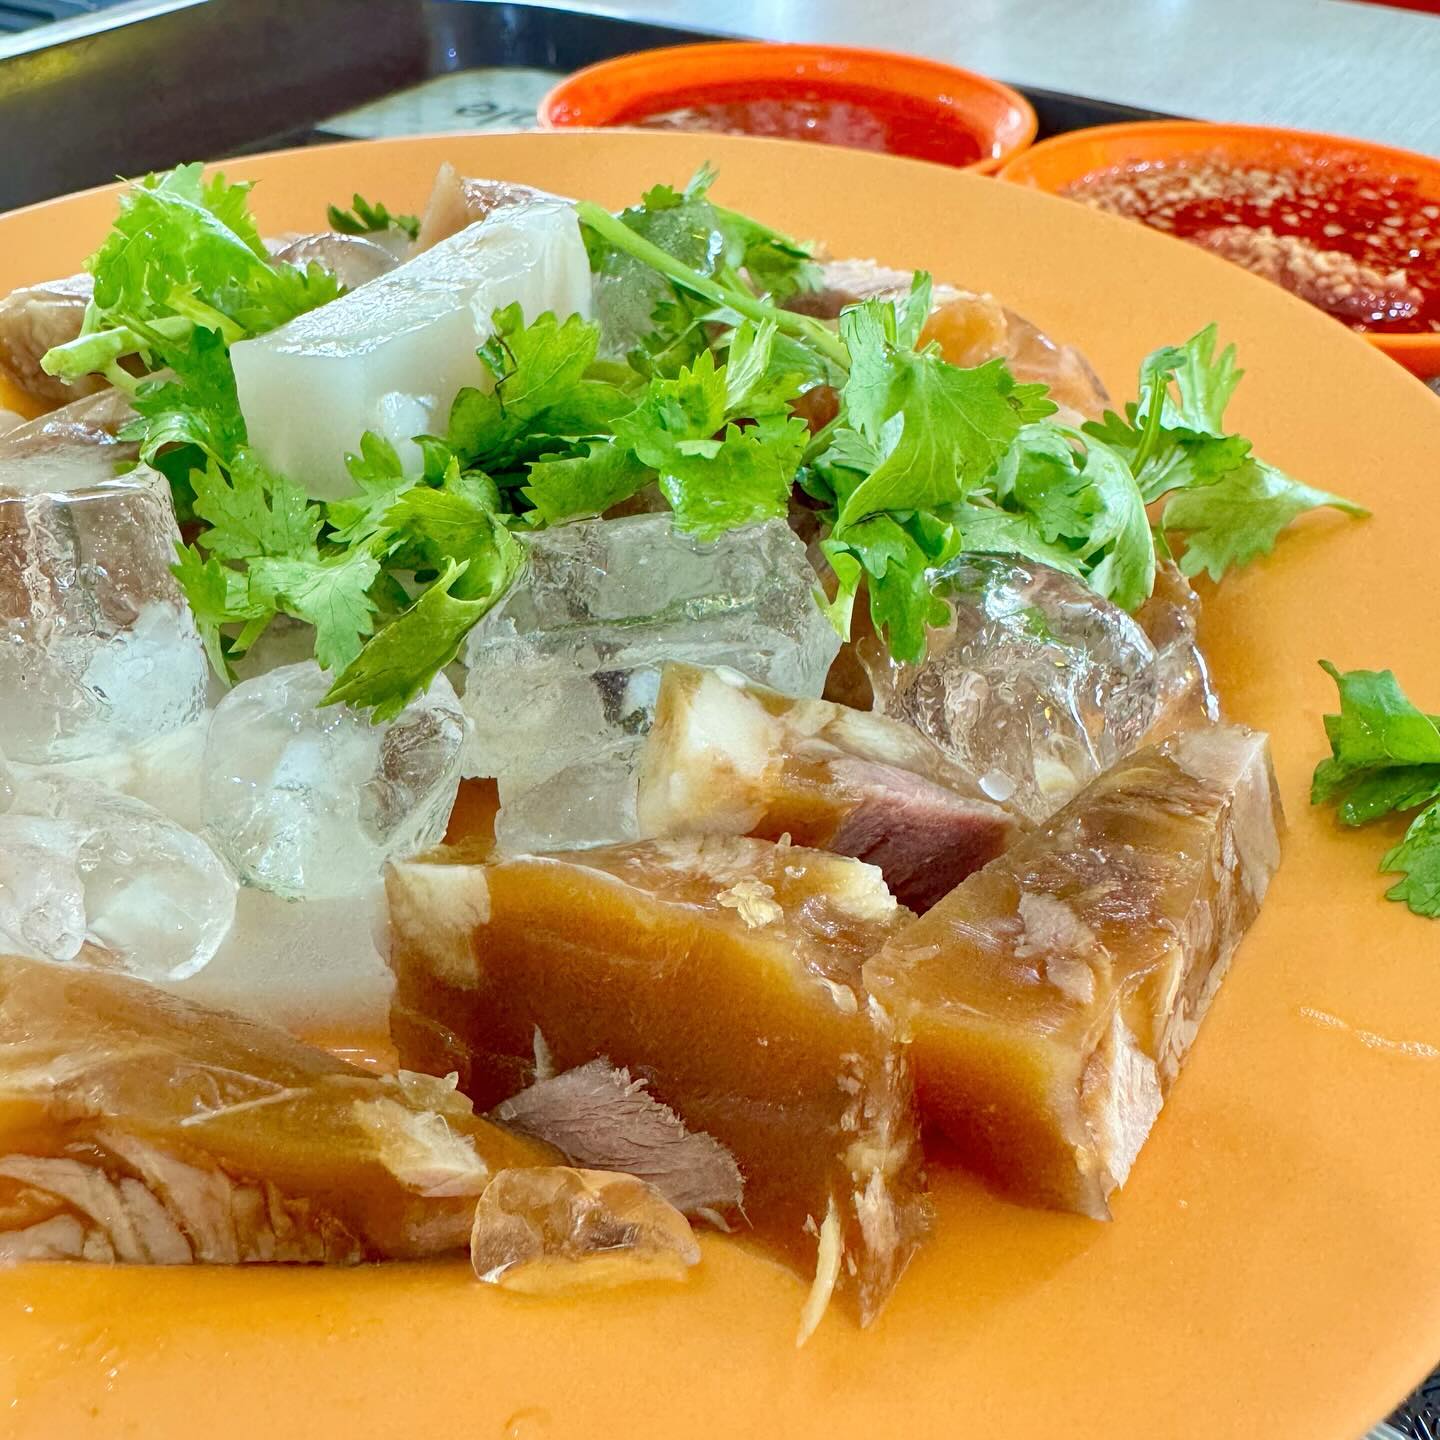 Best Teochew Food Places Singapore - Lao Liang